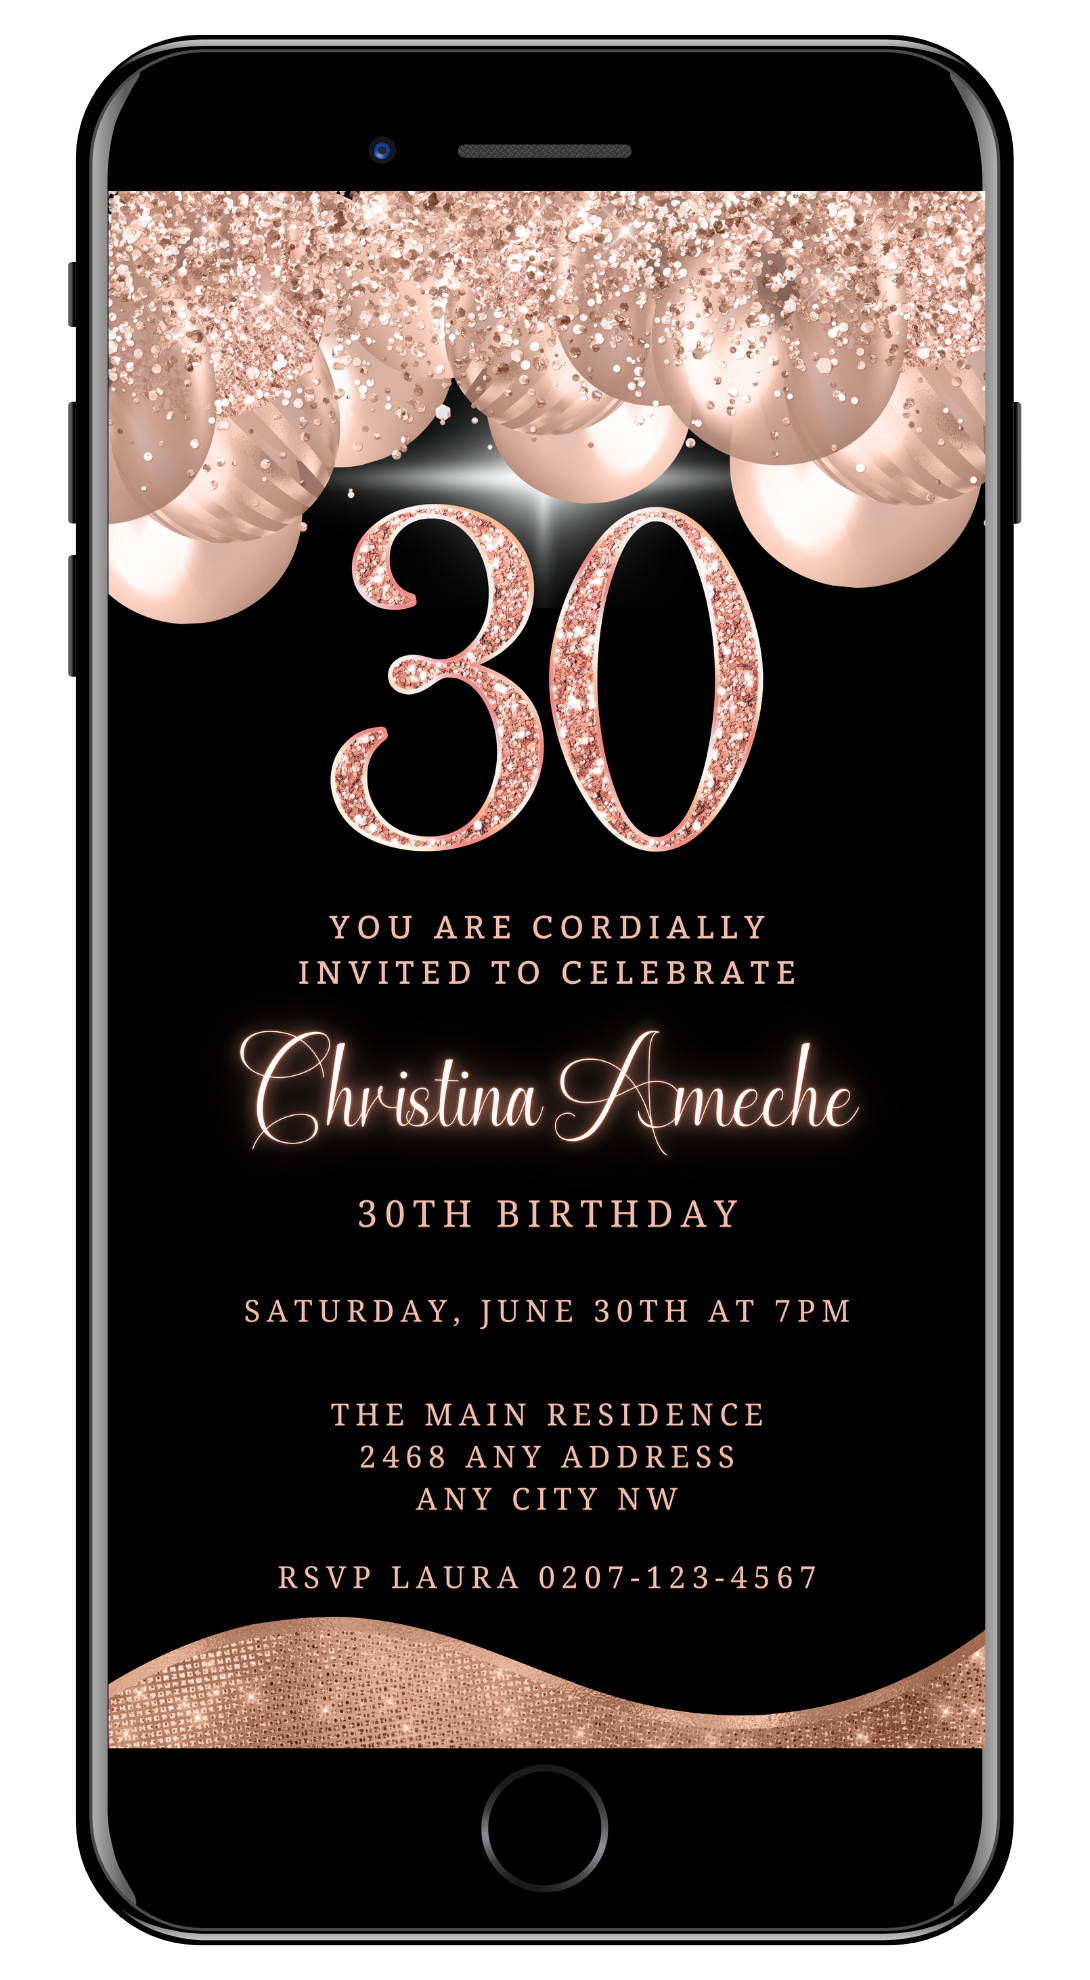 Customizable digital invitation titled Rose Gold Balloons Glitter | 30th Birthday Evite featuring black and gold design with pink and gold balloons, editable via Canva.